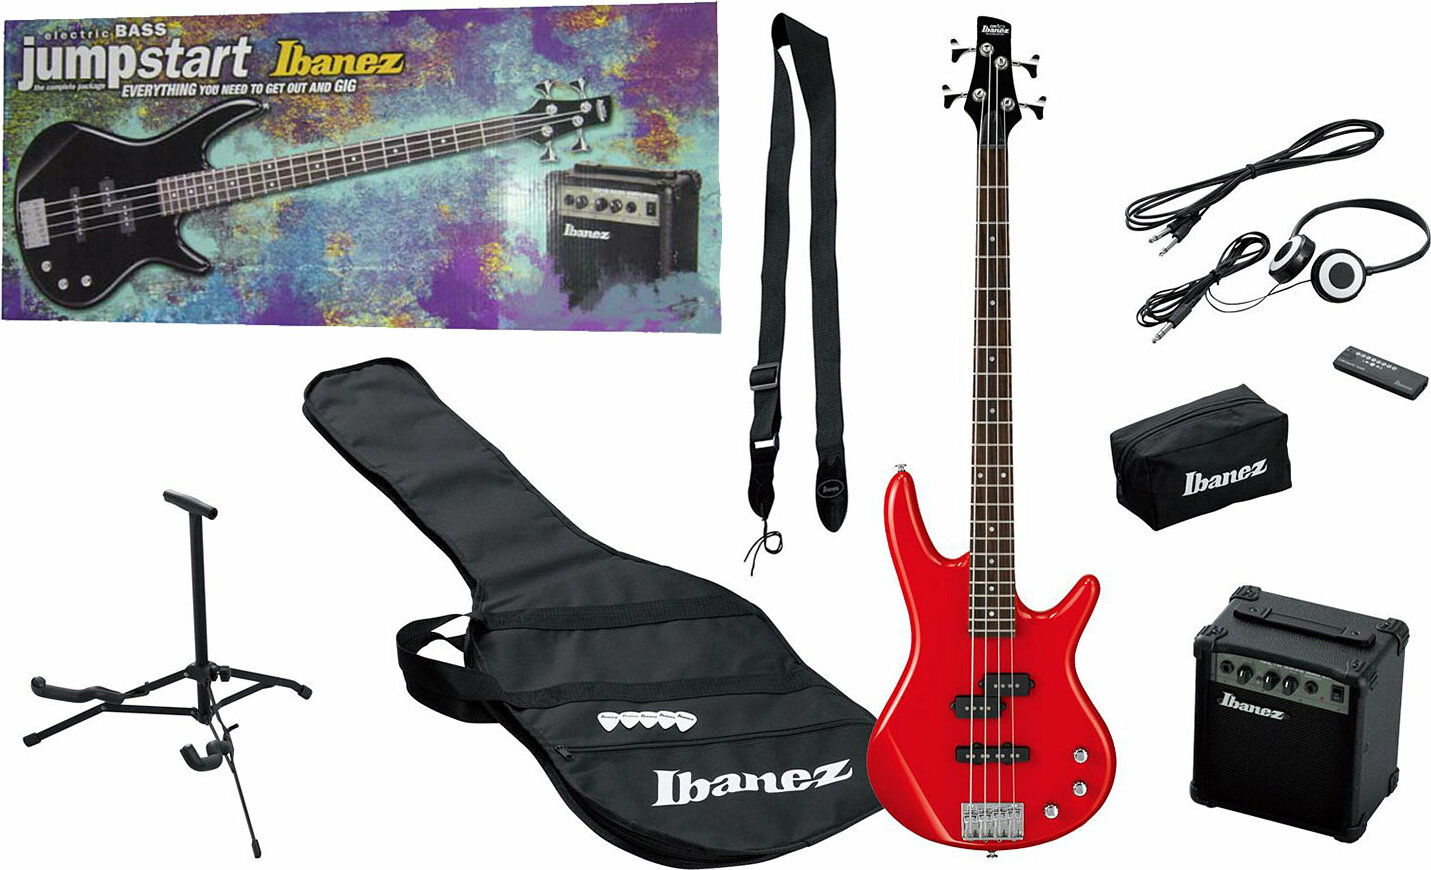 Ibanez Ijsr190 Rd Jumpstart Guitar Package - Red - E-Bass Set - Main picture